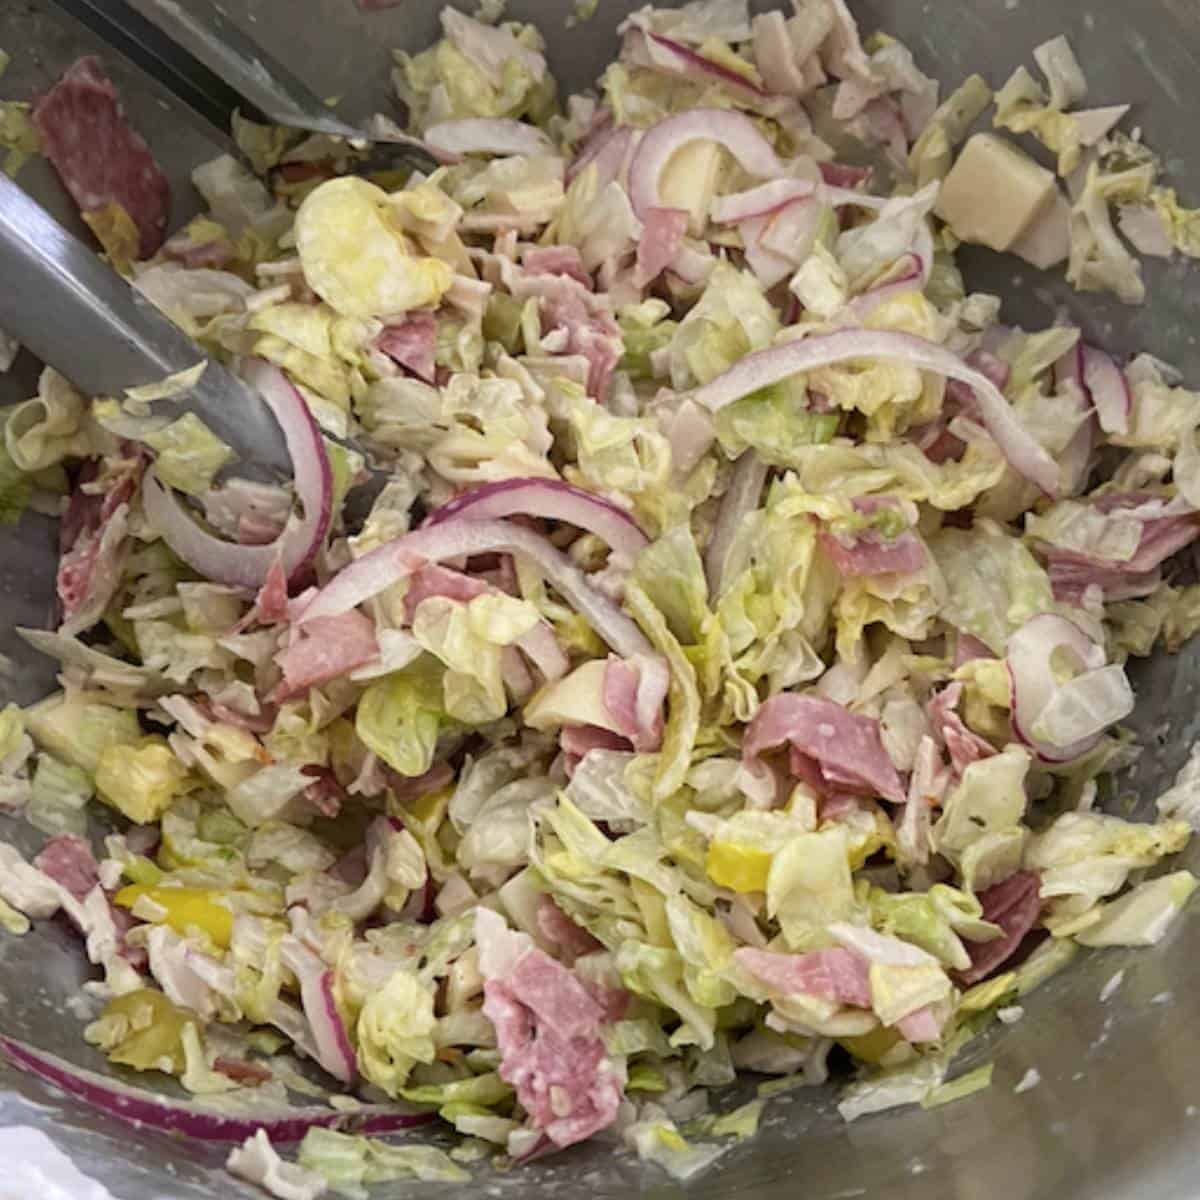 Tossing grinder salad with tongs.